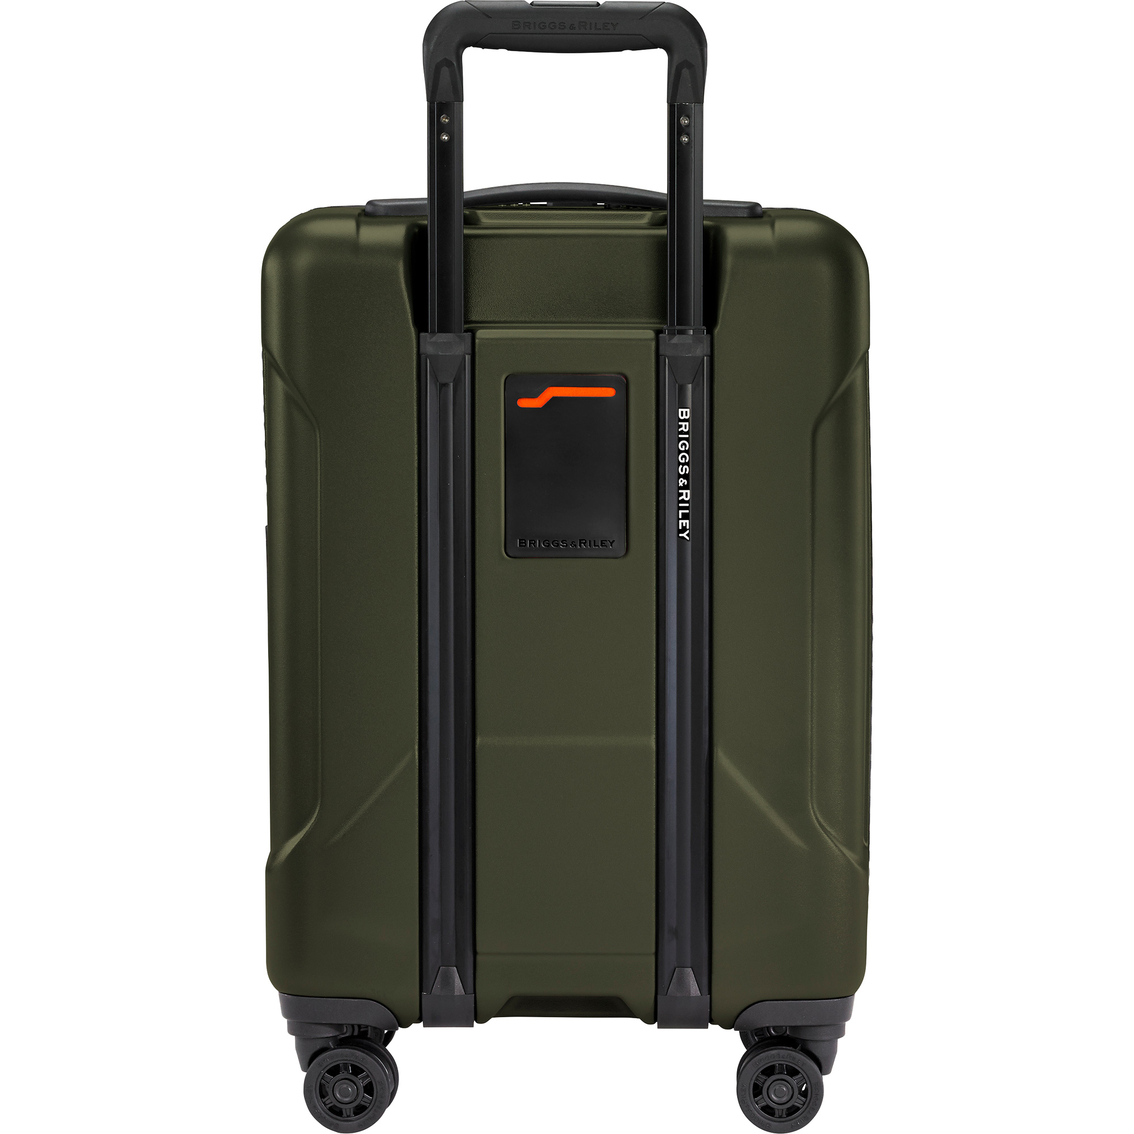 Briggs & Riley Torq 21 in. International Carry-On Spinner - Image 3 of 10